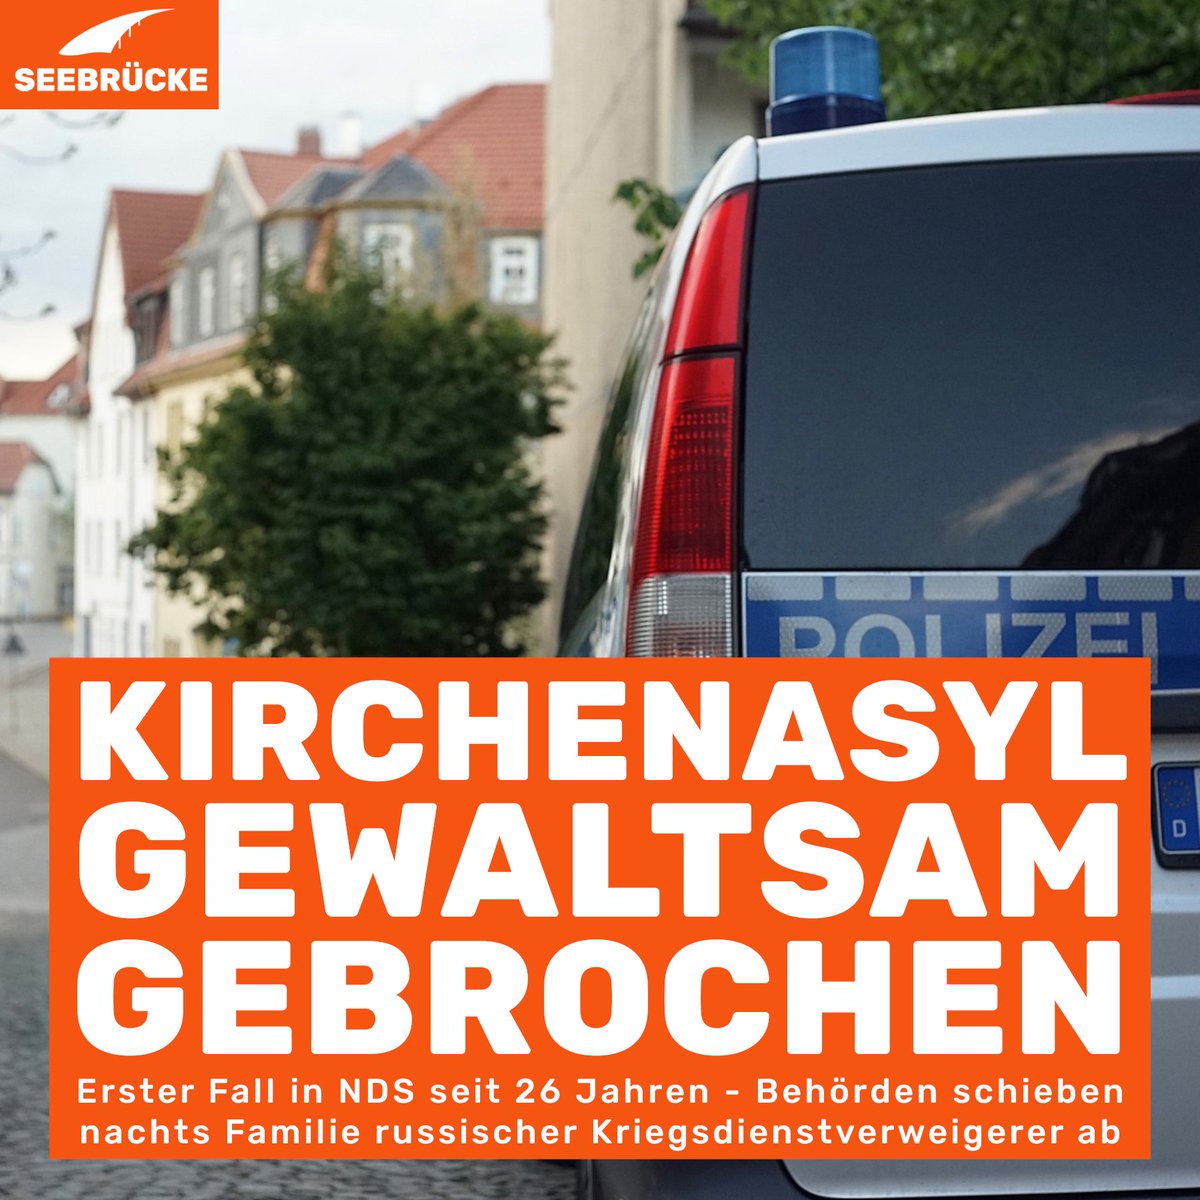 Last Sunday night, the police in Lower Saxony forced their way into a church for the first time in 26 years to carry out a deportation. Around 15 officers sealed off the rectory of the parish of St Michael's in #Bienenbüttel and entered with a search warrant.